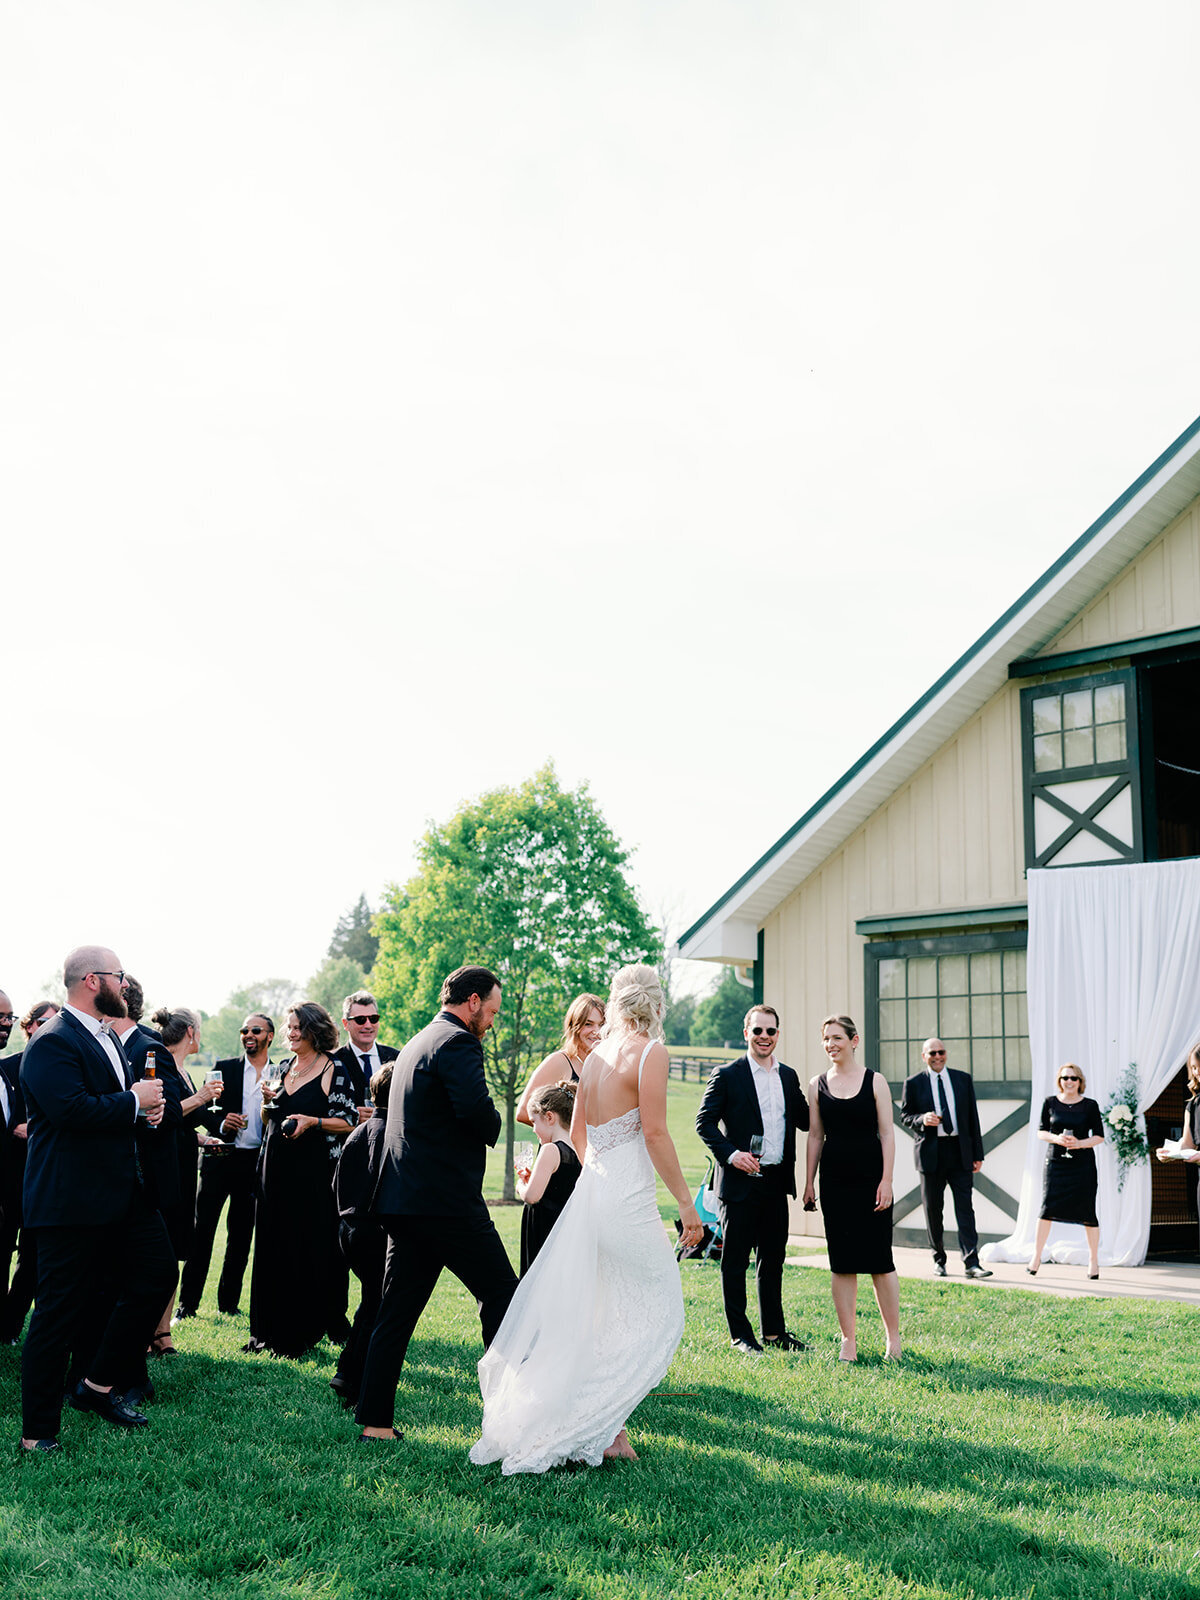 Bride and groom walk in towards stables for their wedding reception at salamander resort